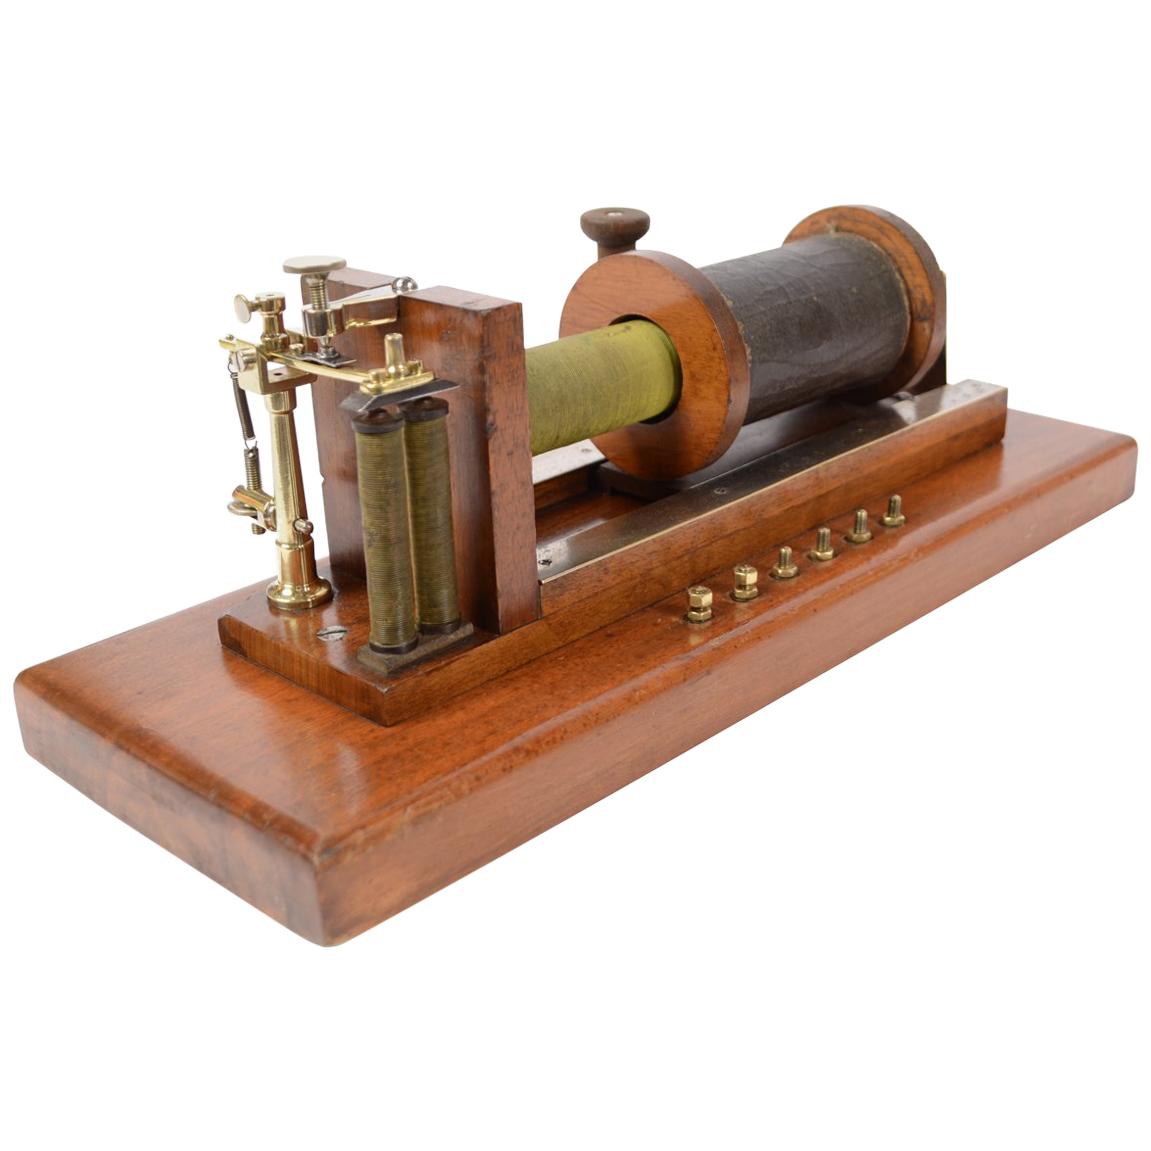 Induction coil by Du Bois Reymond, also known as Sled of the Du Bois Reymond system designed around 1870 during electrophysiology studies by Emil Du Boid Reymond (1818-1896) known German physiologist. There are two coils, a fixed one and a larger